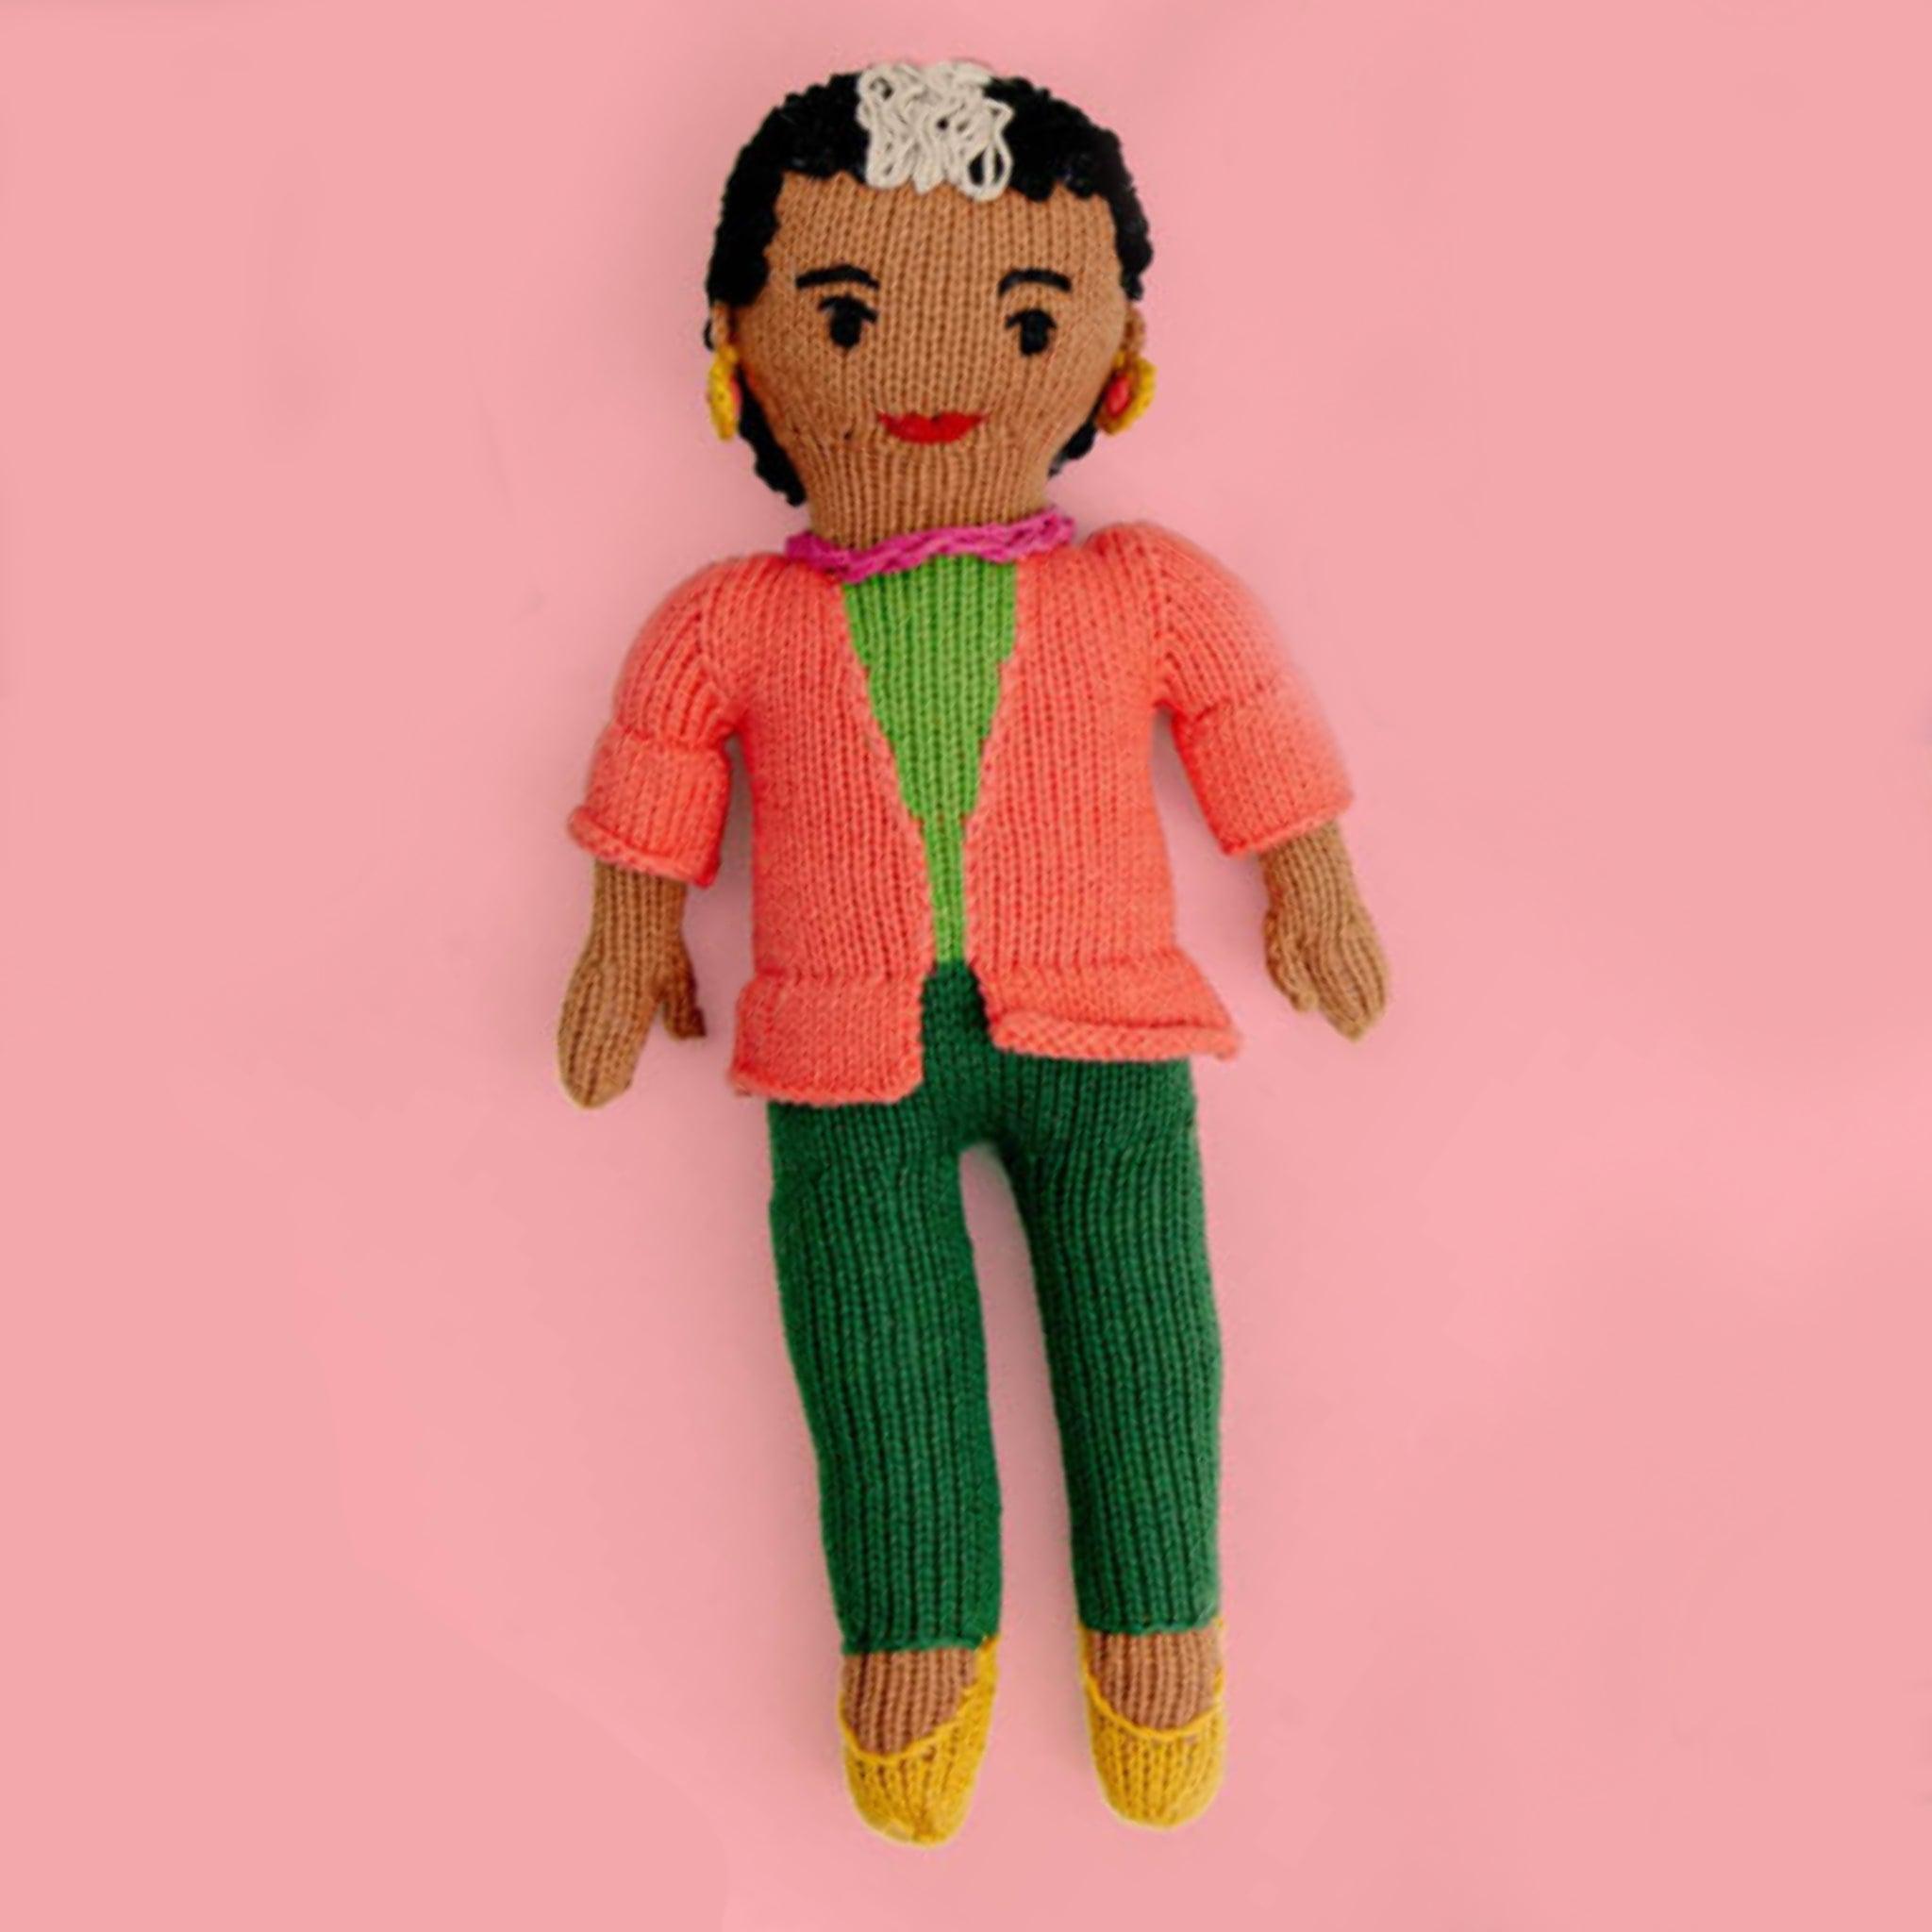 Knit Maya Angelou Toy - Why and Whale